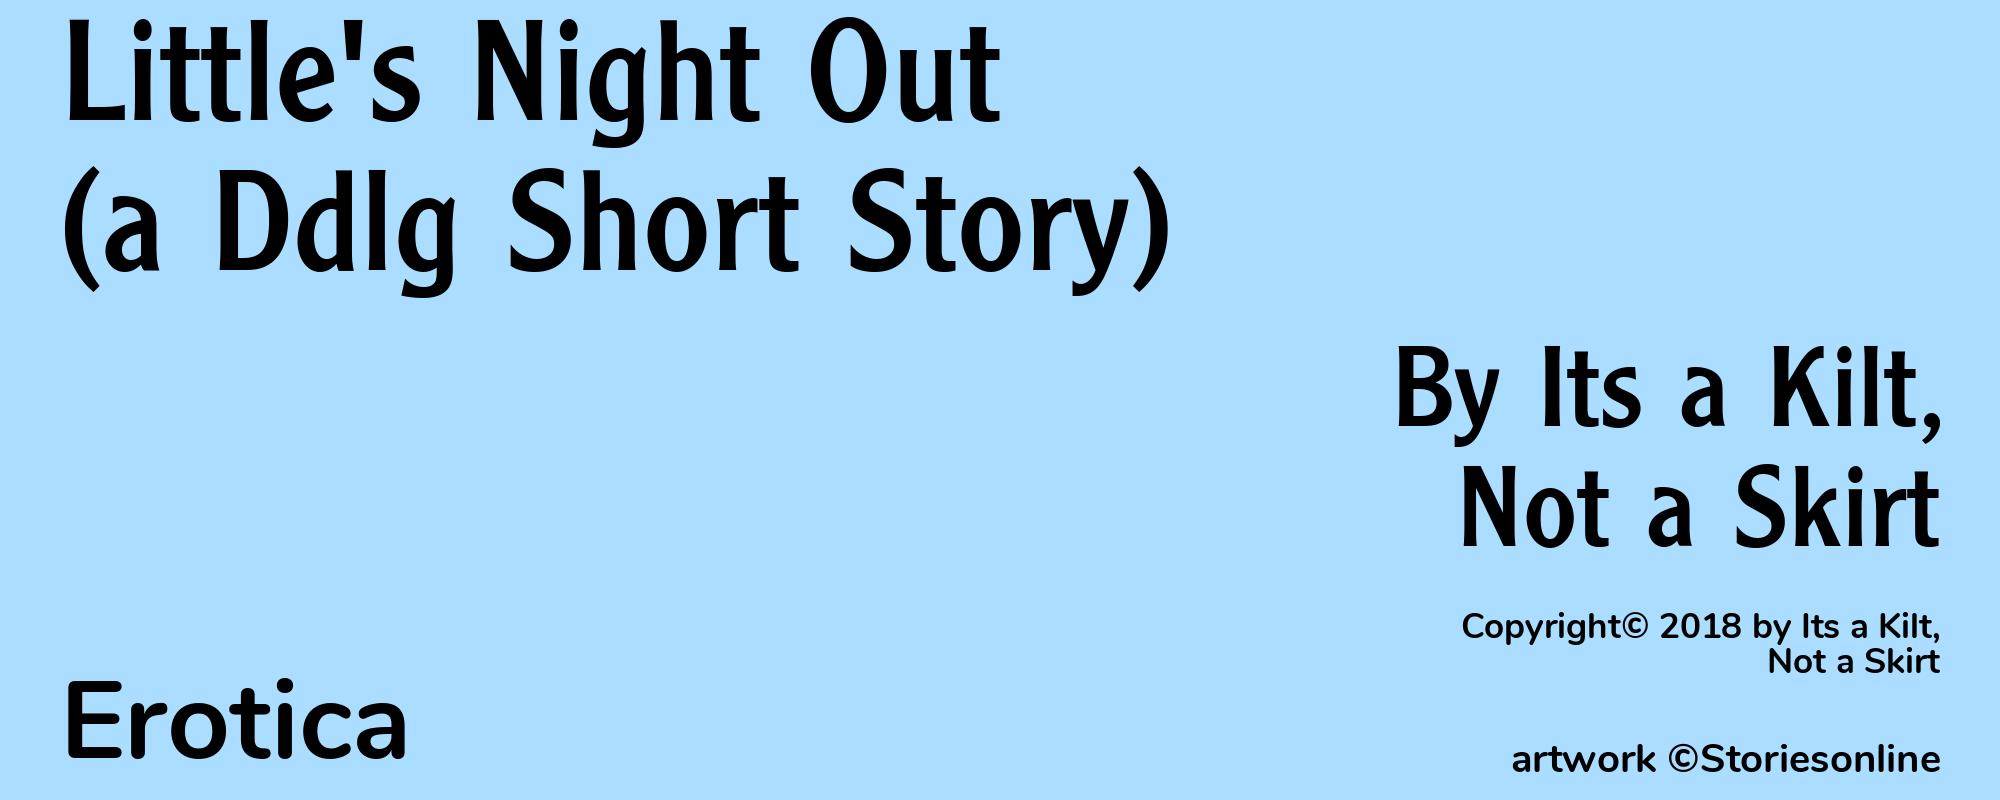 Little's Night Out (a Ddlg Short Story) - Cover